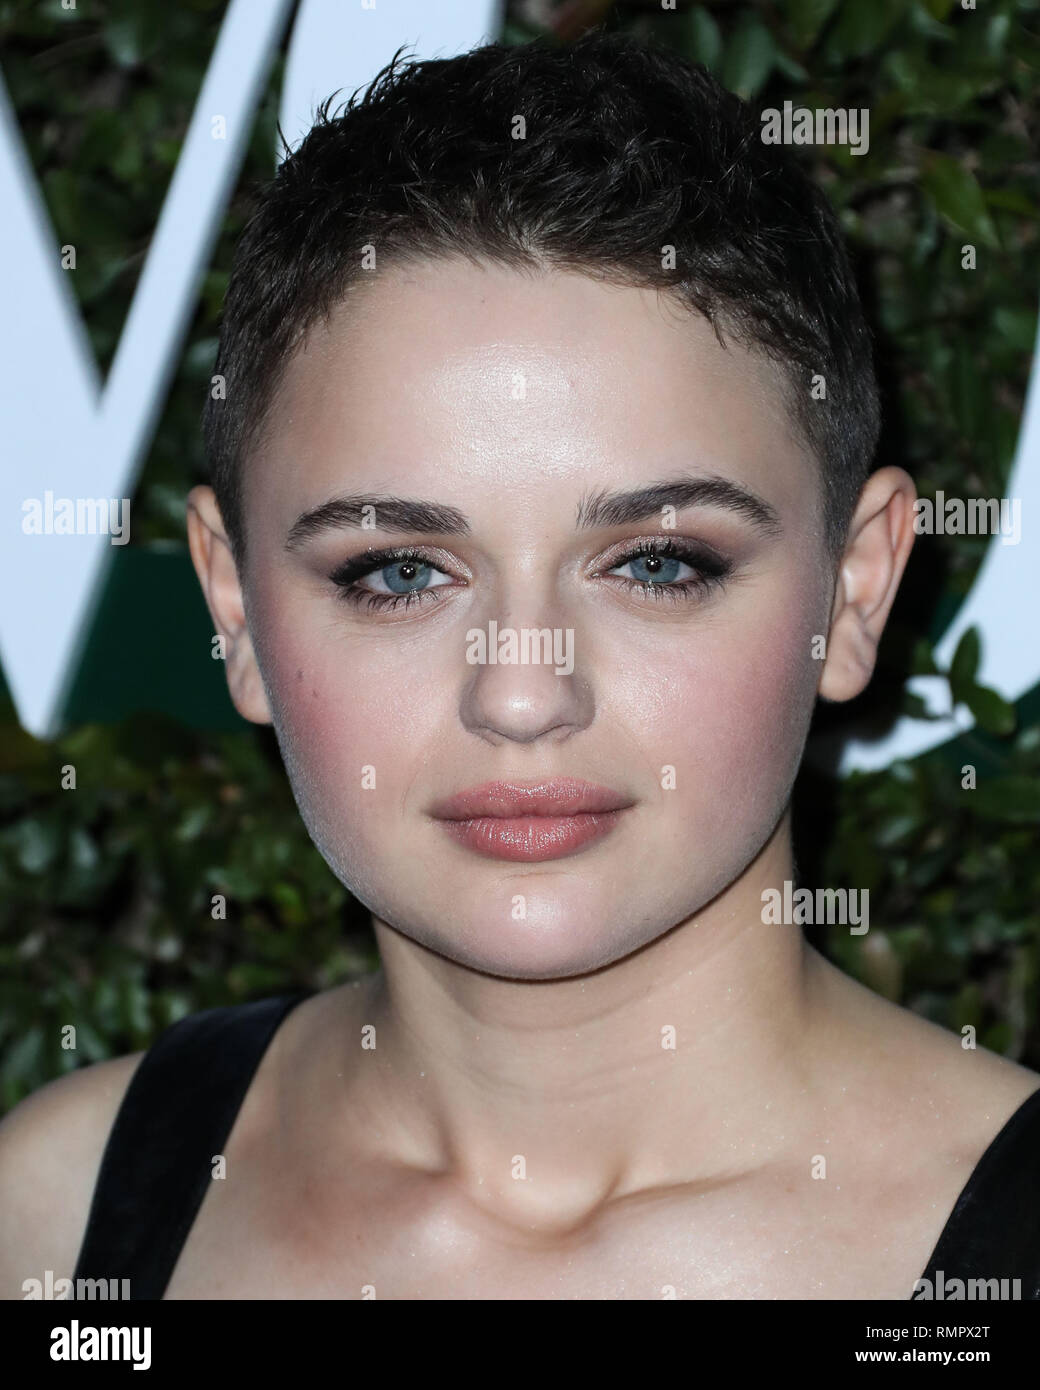 LOS ANGELES, CA, USA - FEBRUARY 15: Actress Joey King arrives at Teen Vogue's 2019 Young Hollywood Party Presented By Snap held at the Los Angeles Theatre on February 15, 2019 in Los Angeles, California, United States. (Photo by Xavier Collin/Image Press Agency) Stock Photo